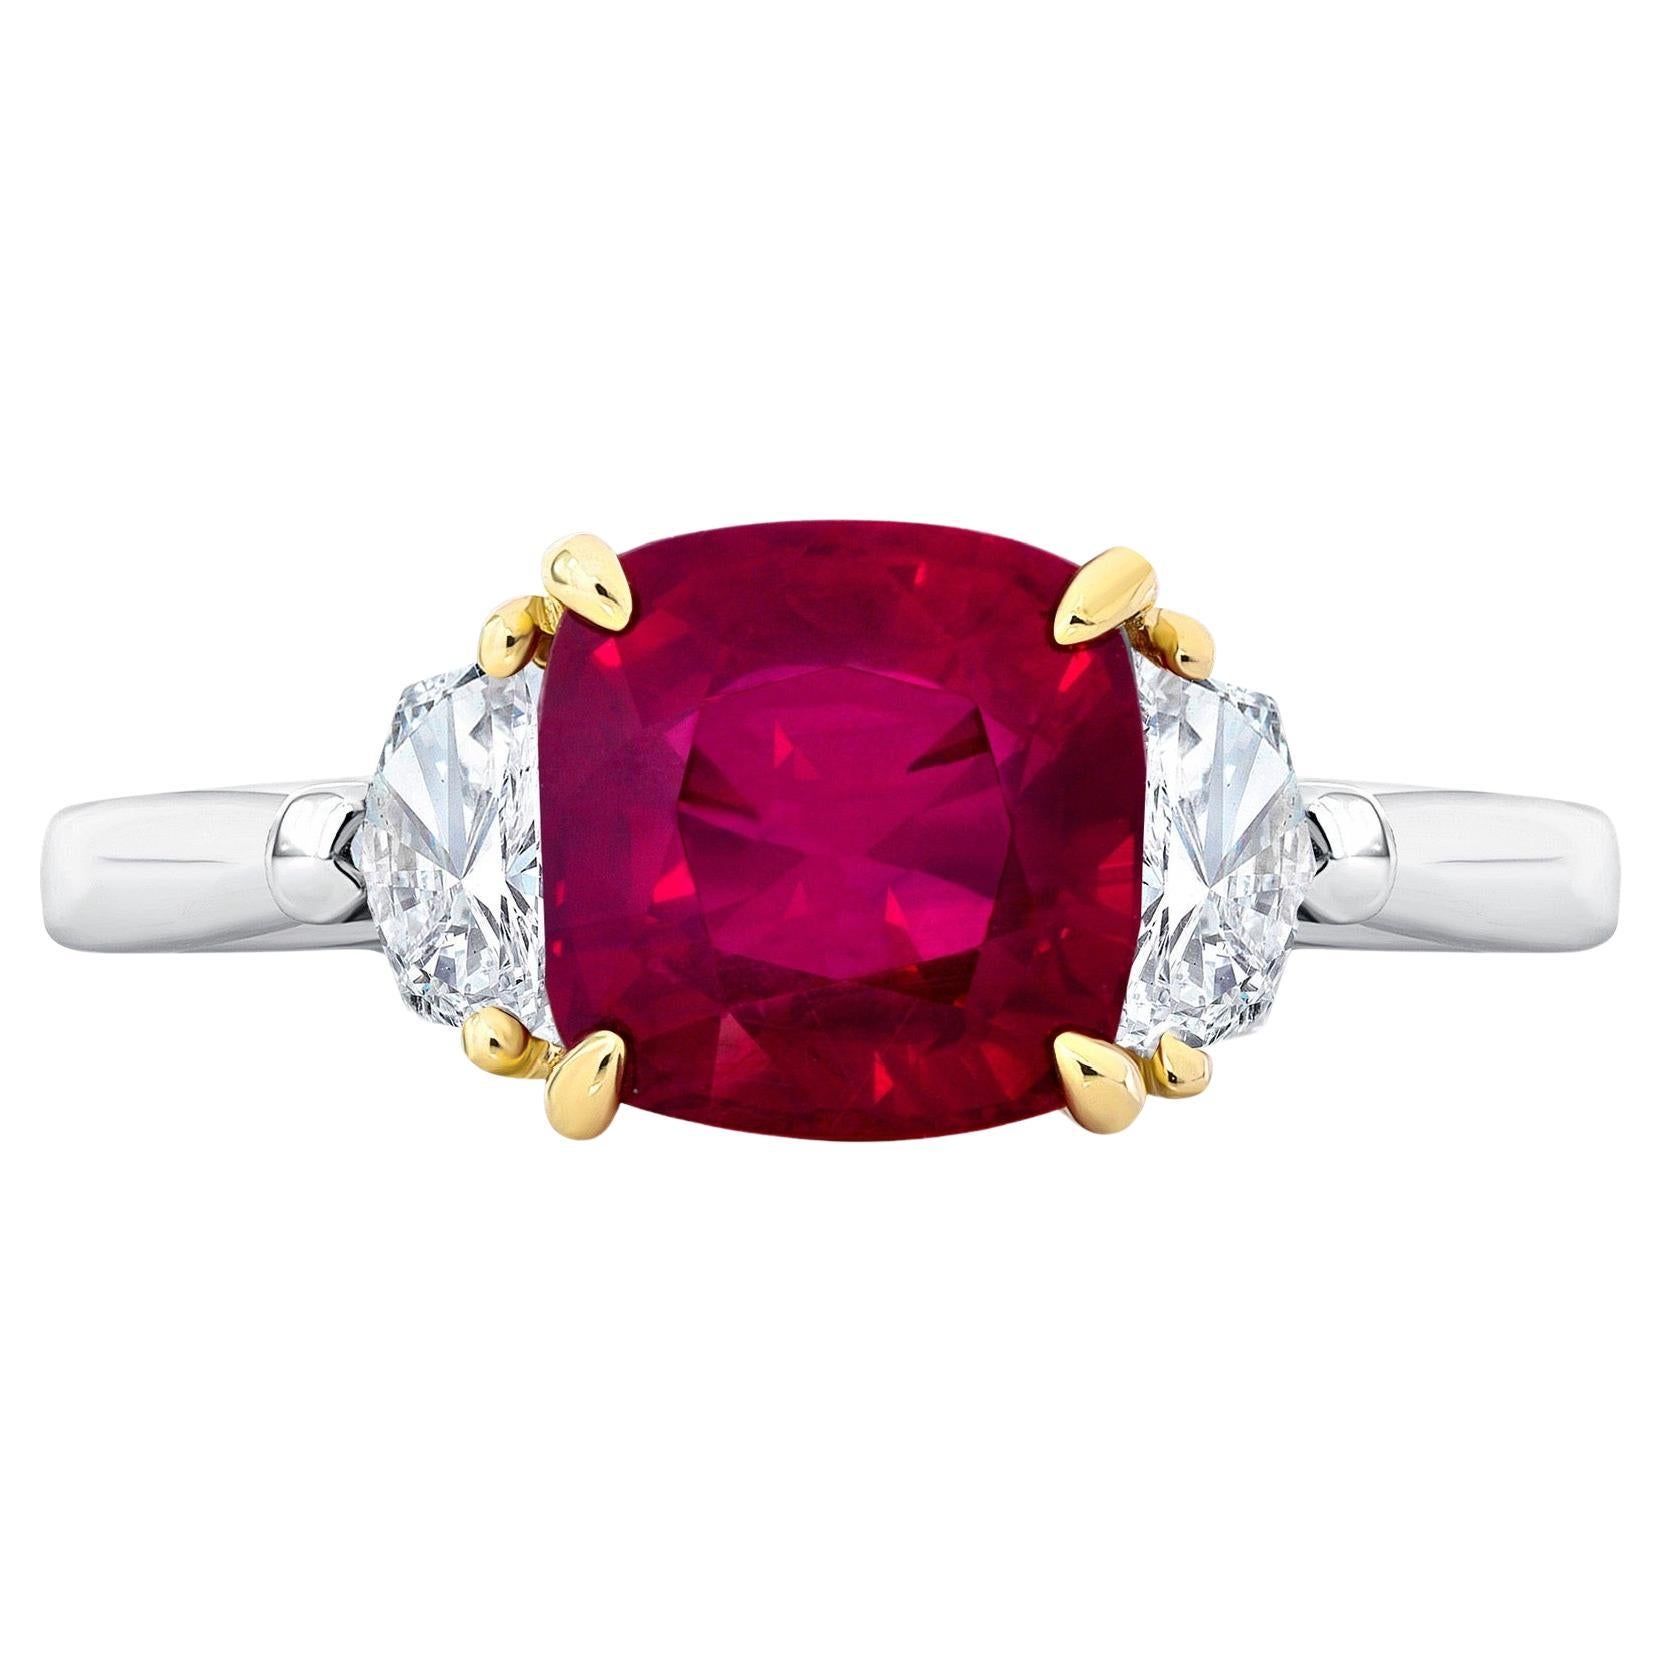 3.14ct untreated cushion Mozambique Ruby ring. GIA certified.